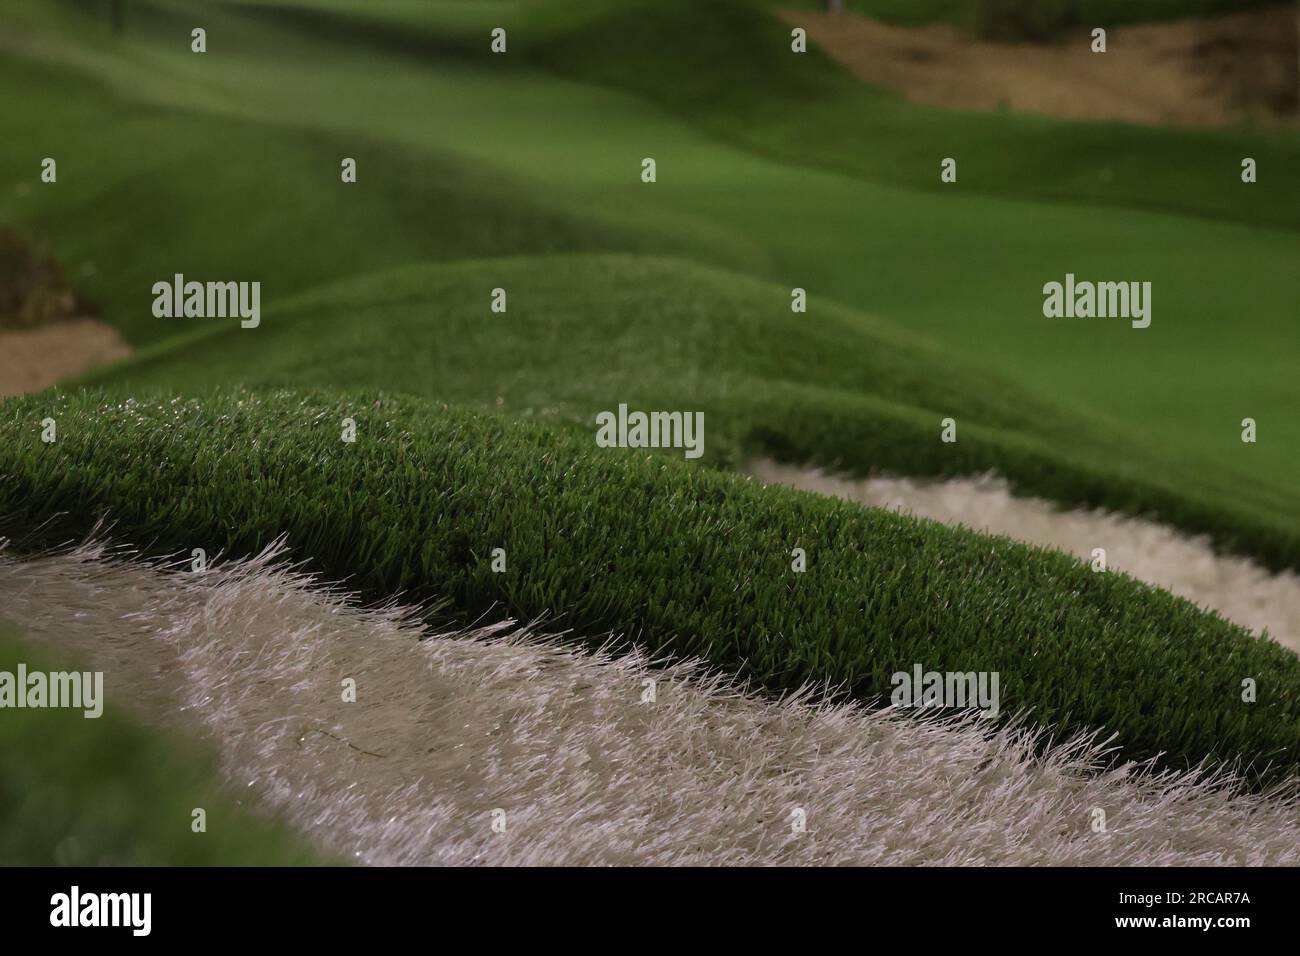 Putting green from artificial grass Stock Photo